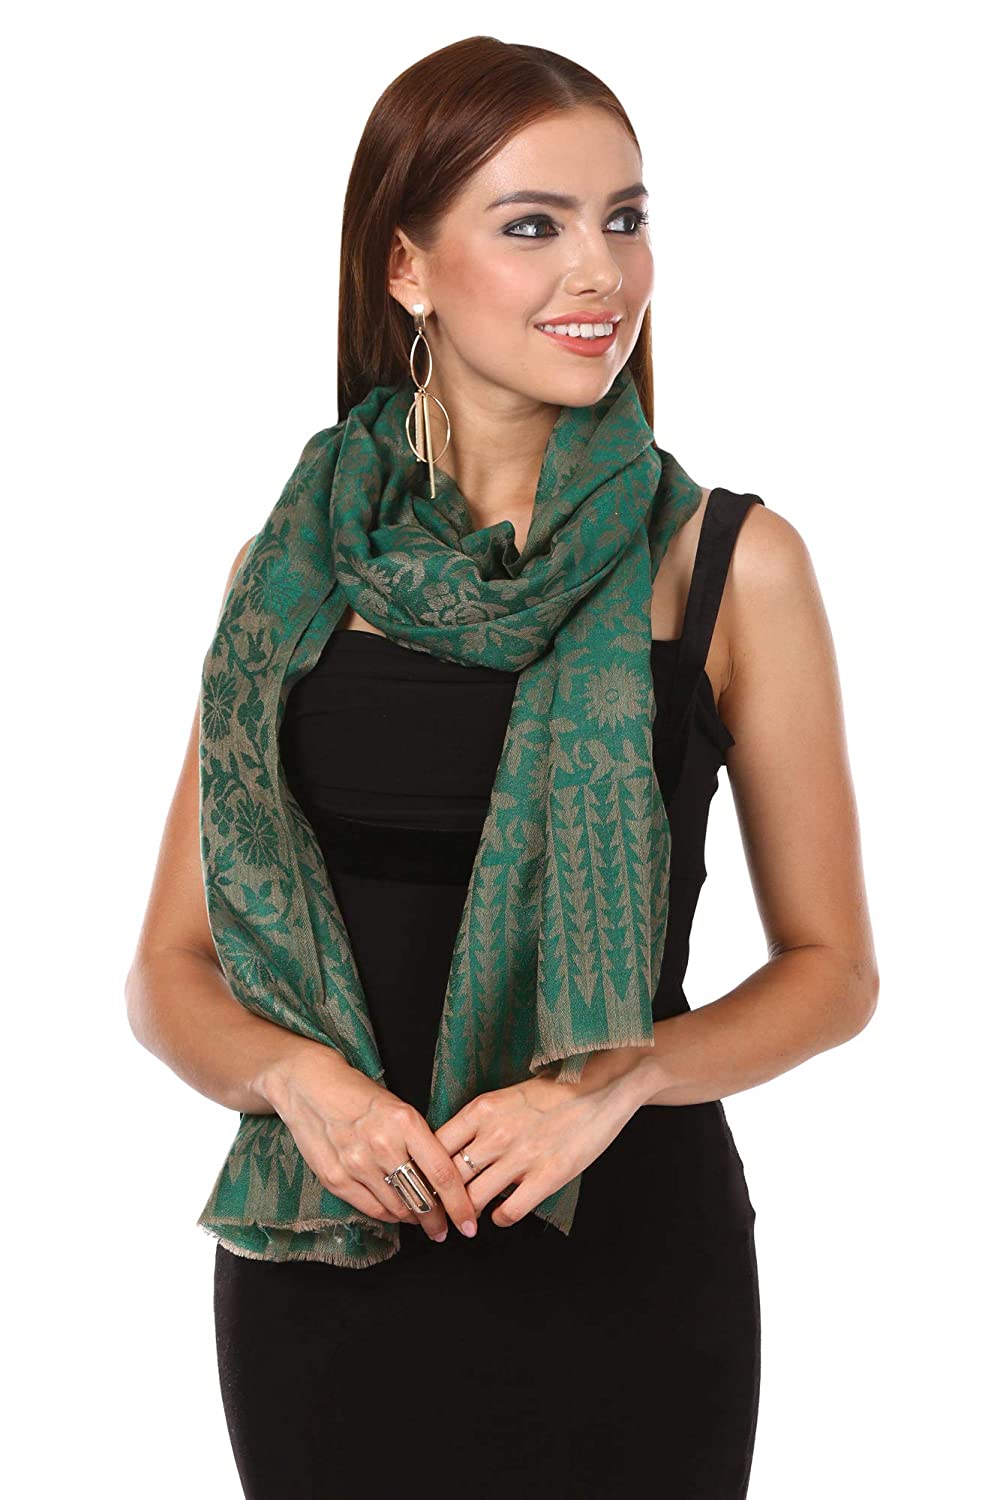 Pashtush India 70x200 WOMEN'S SILK-WOOL REVERSIBLE FLORAL SCARF, SOFT AND WARM, Deep green